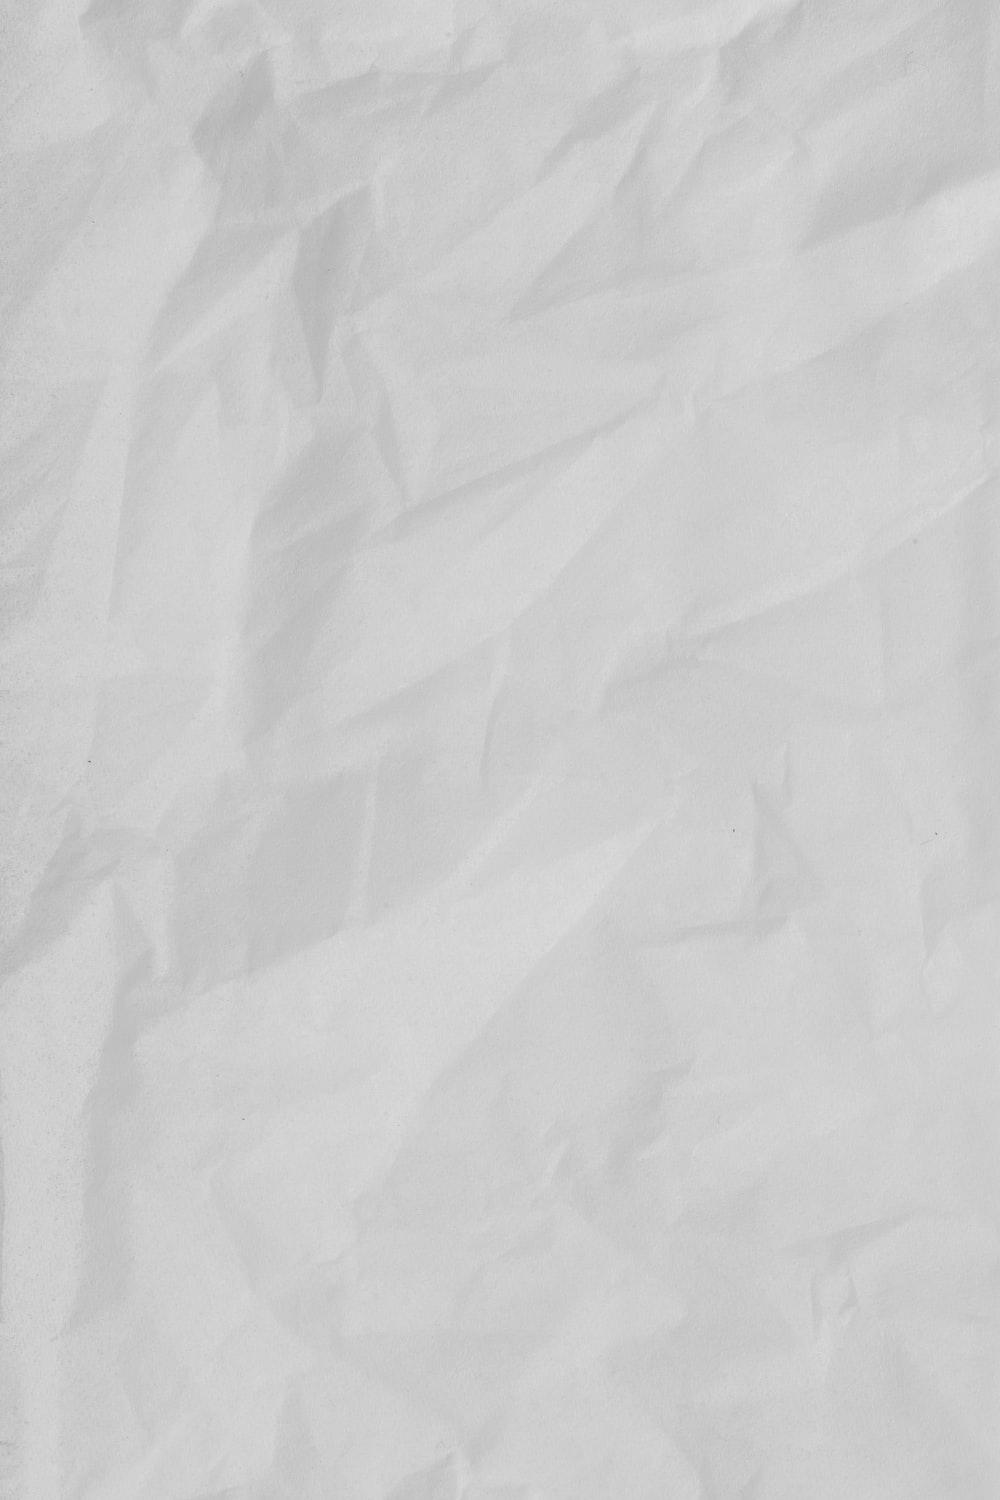 Paper 4K Wallpapers - Top Free Paper 4K Backgrounds - WallpaperAccess